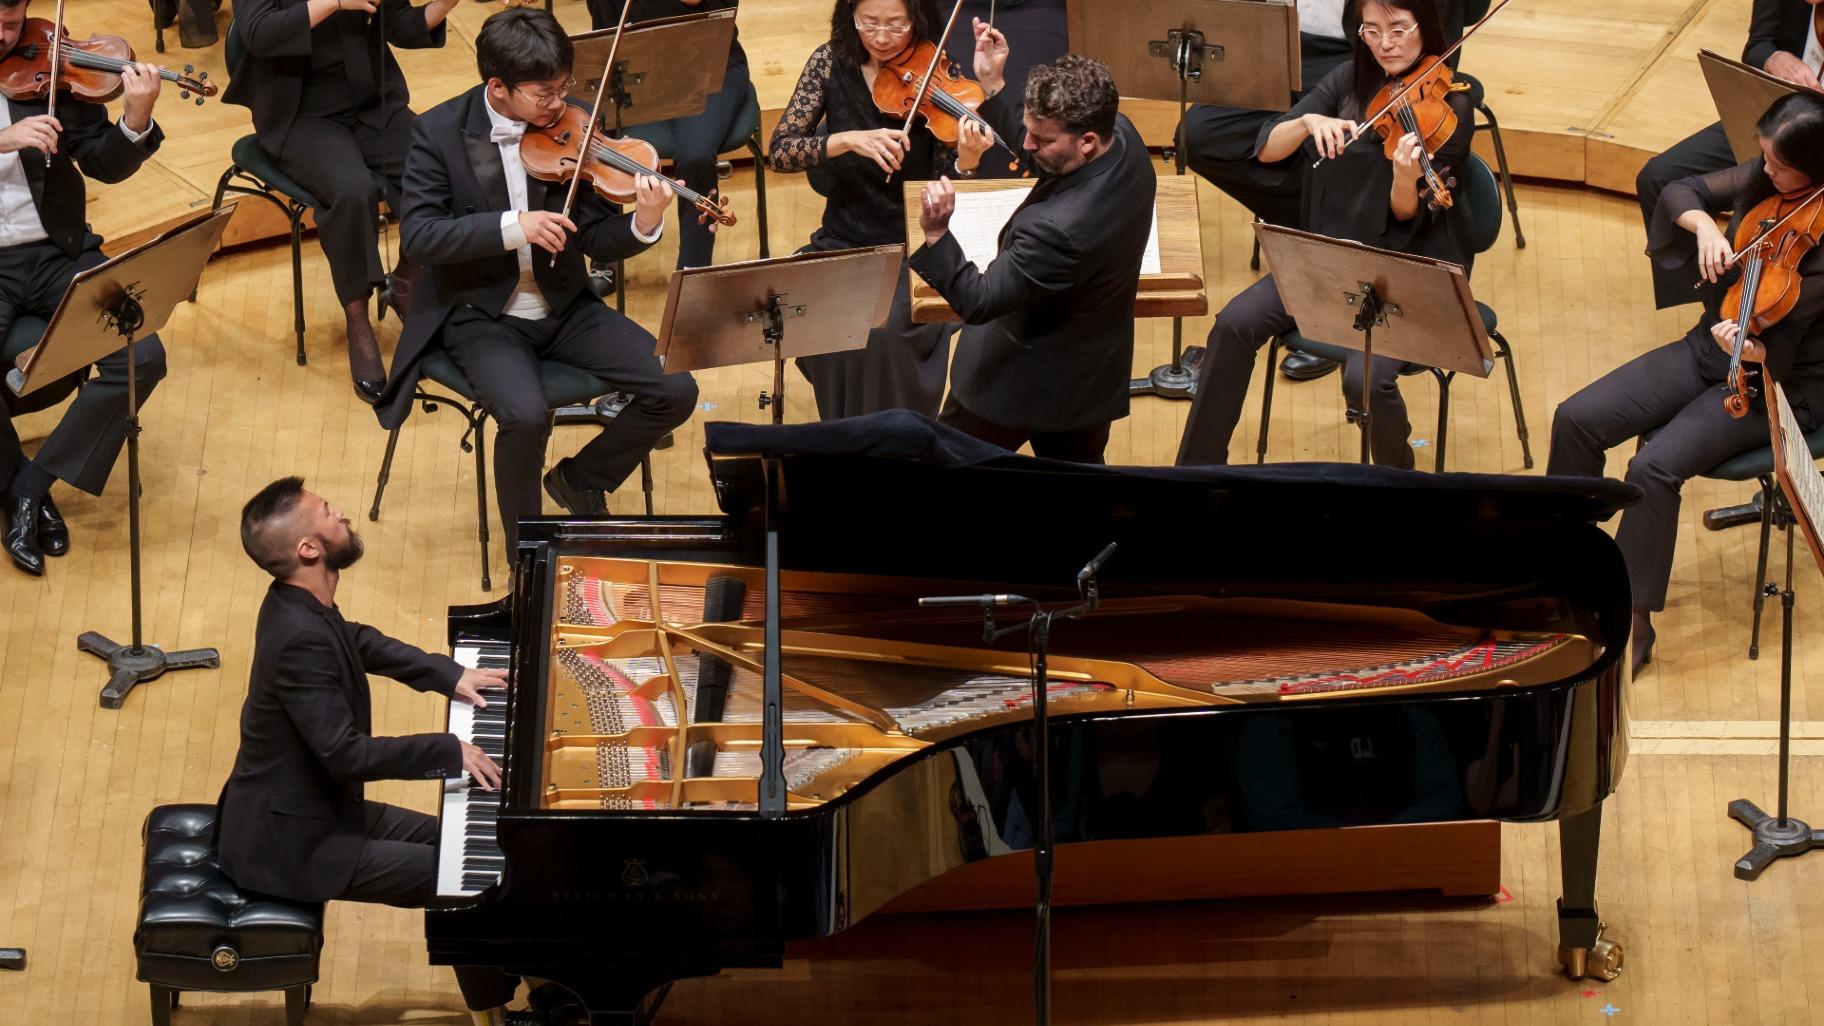 Conrad Tao makes his CSO subscription debut in a performance of Gershwin’s “Concerto in F Major” with the Chicago Symphony Orchestra and conductor James Gaffigan. (Todd Rosenberg)